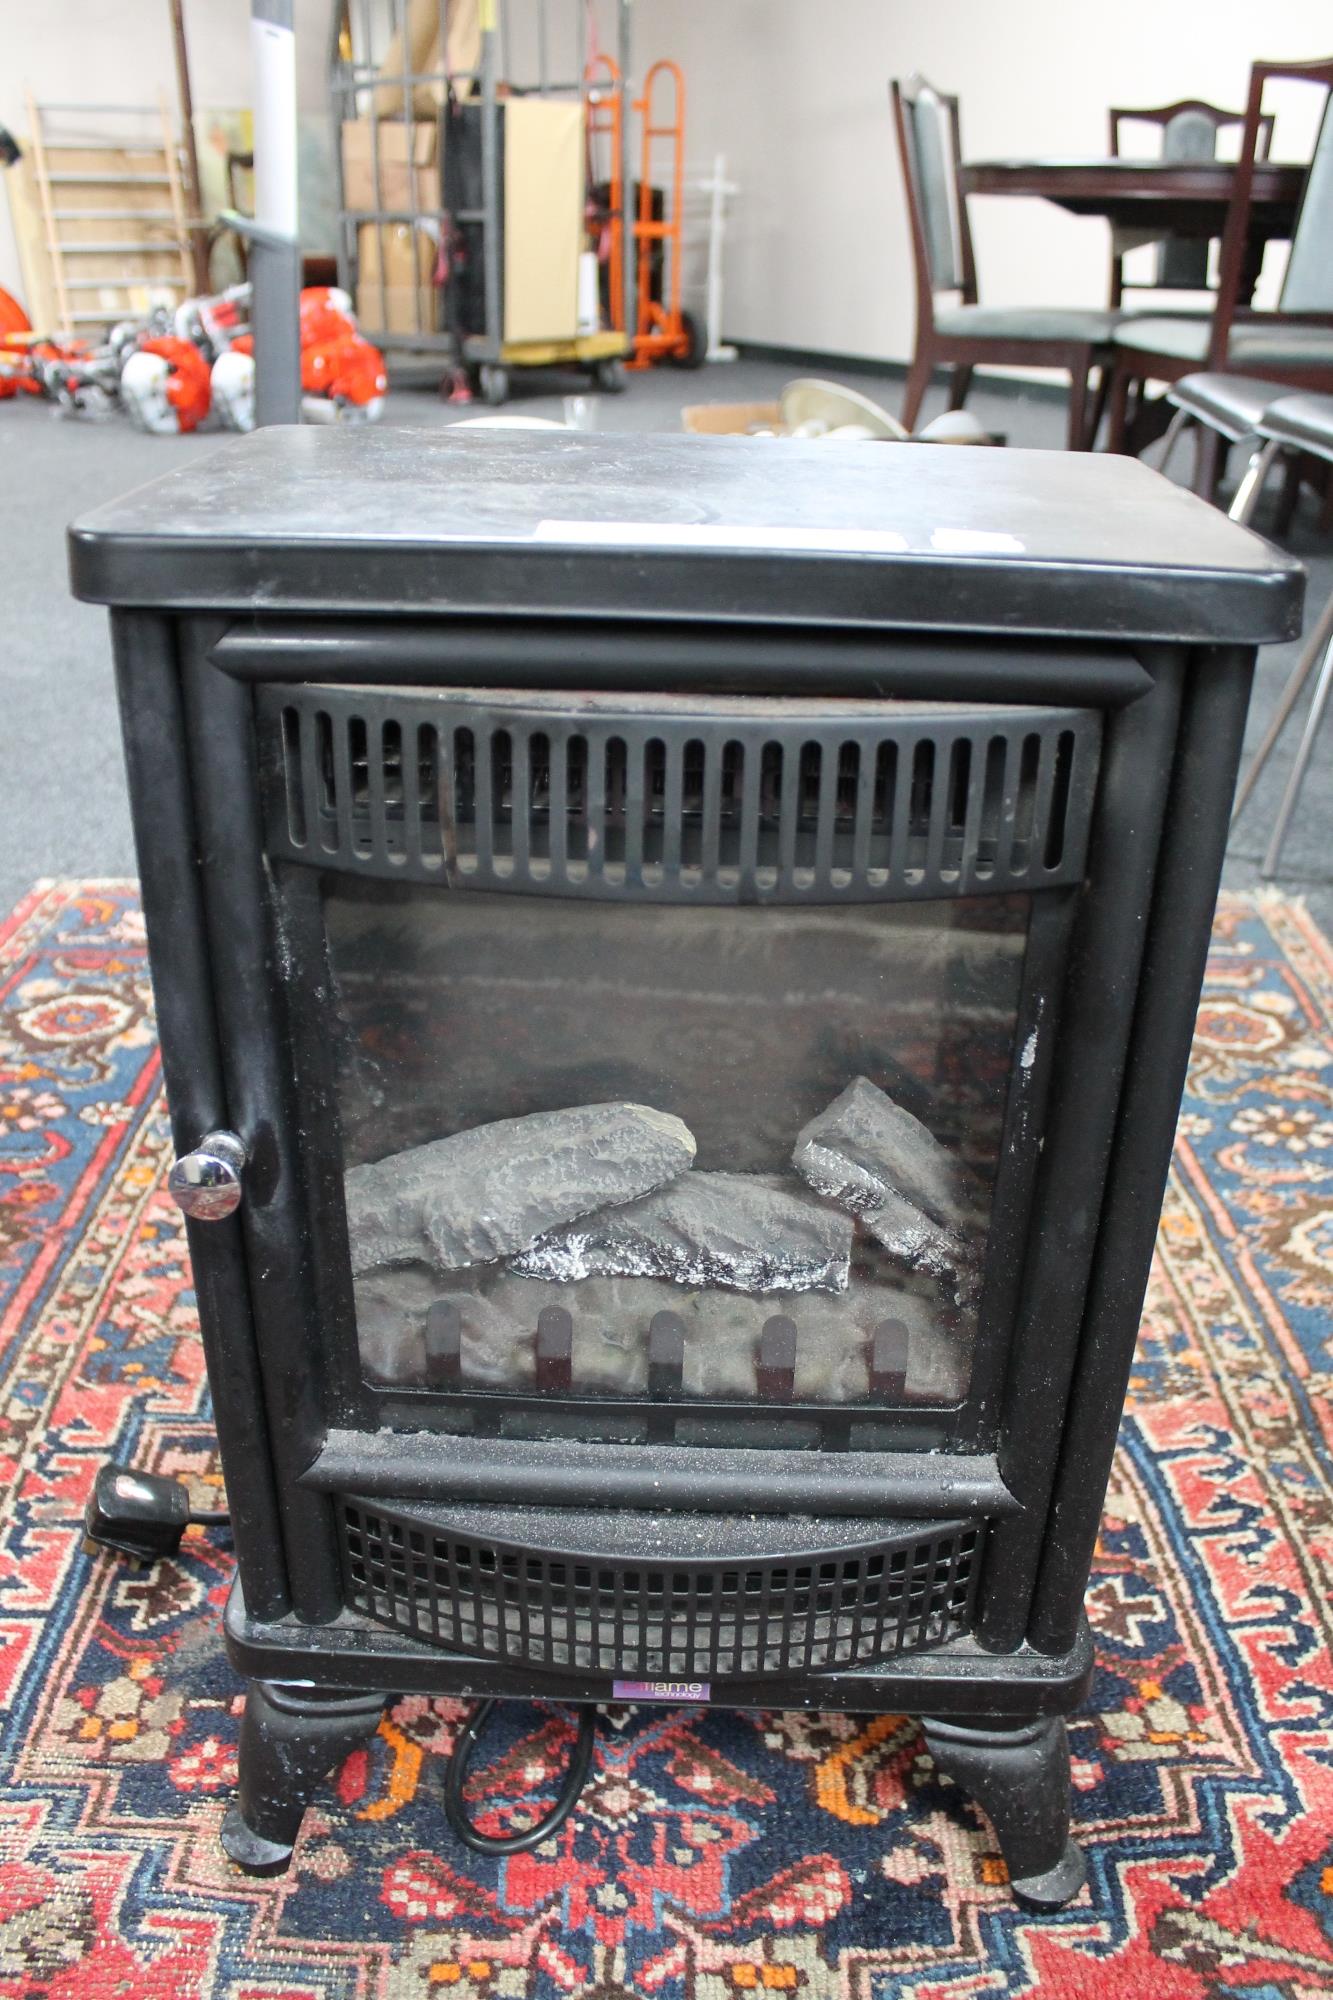 A By Flame electric fire in the form of a stove